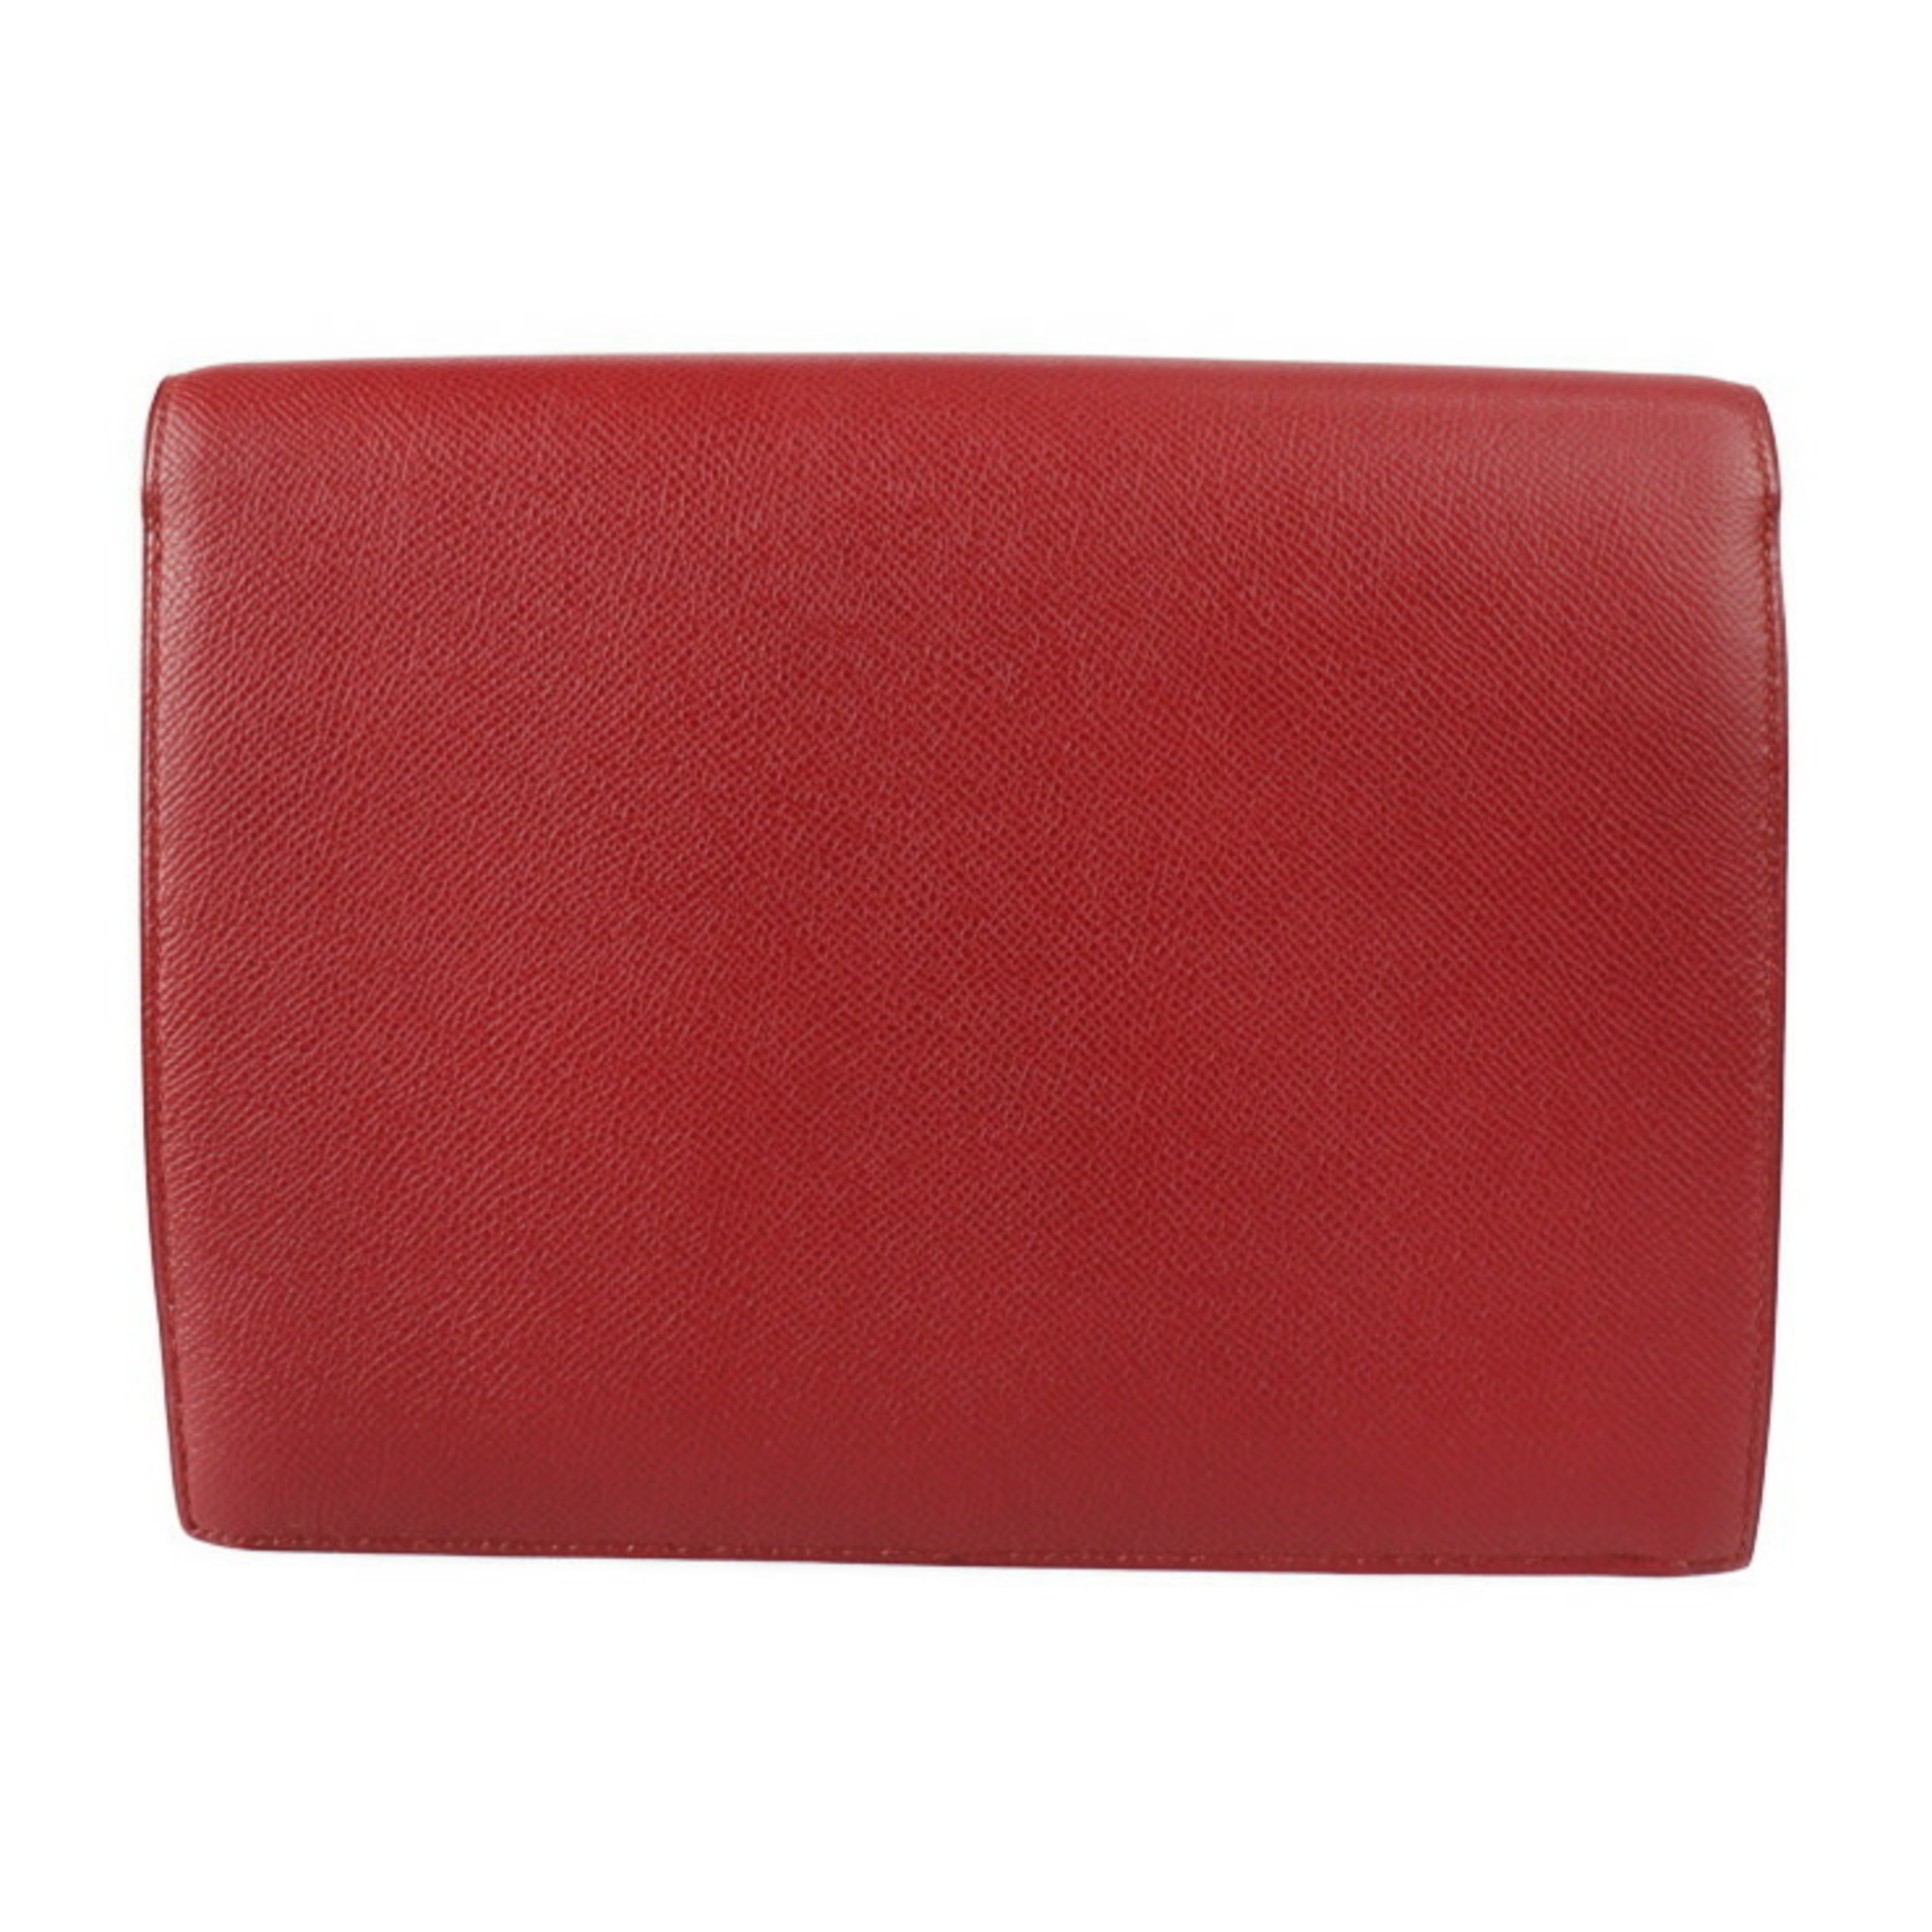 HERMES Hermes Faco Clutch Bag Couchbel Red Series Second 〇T Engraved